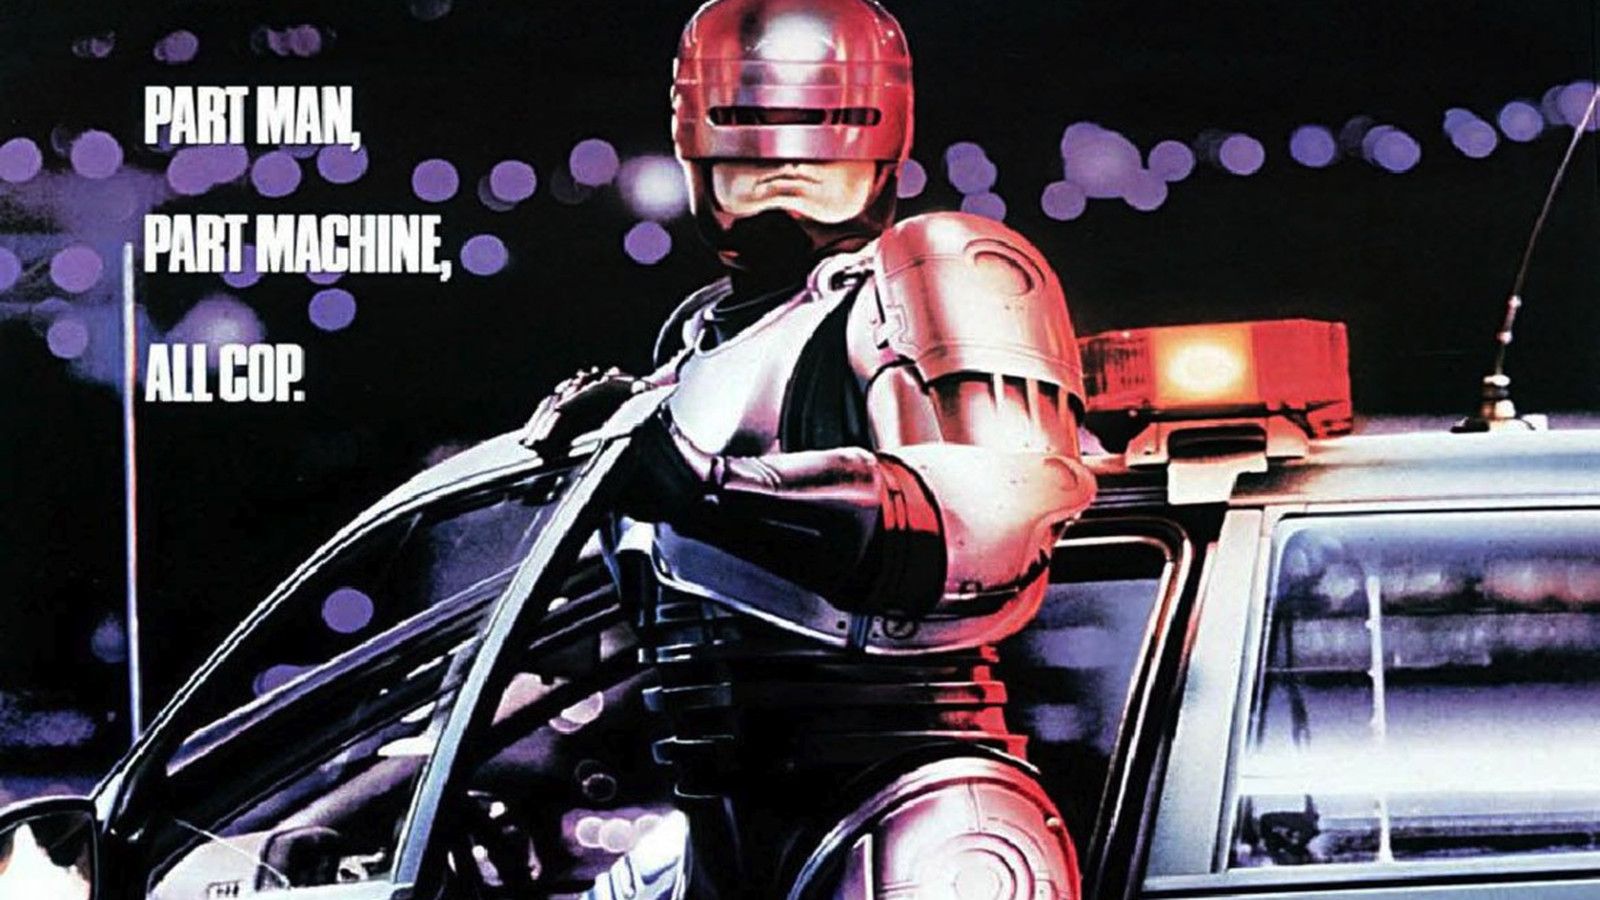 On RoboCop: Somewhere, there is a crime happening